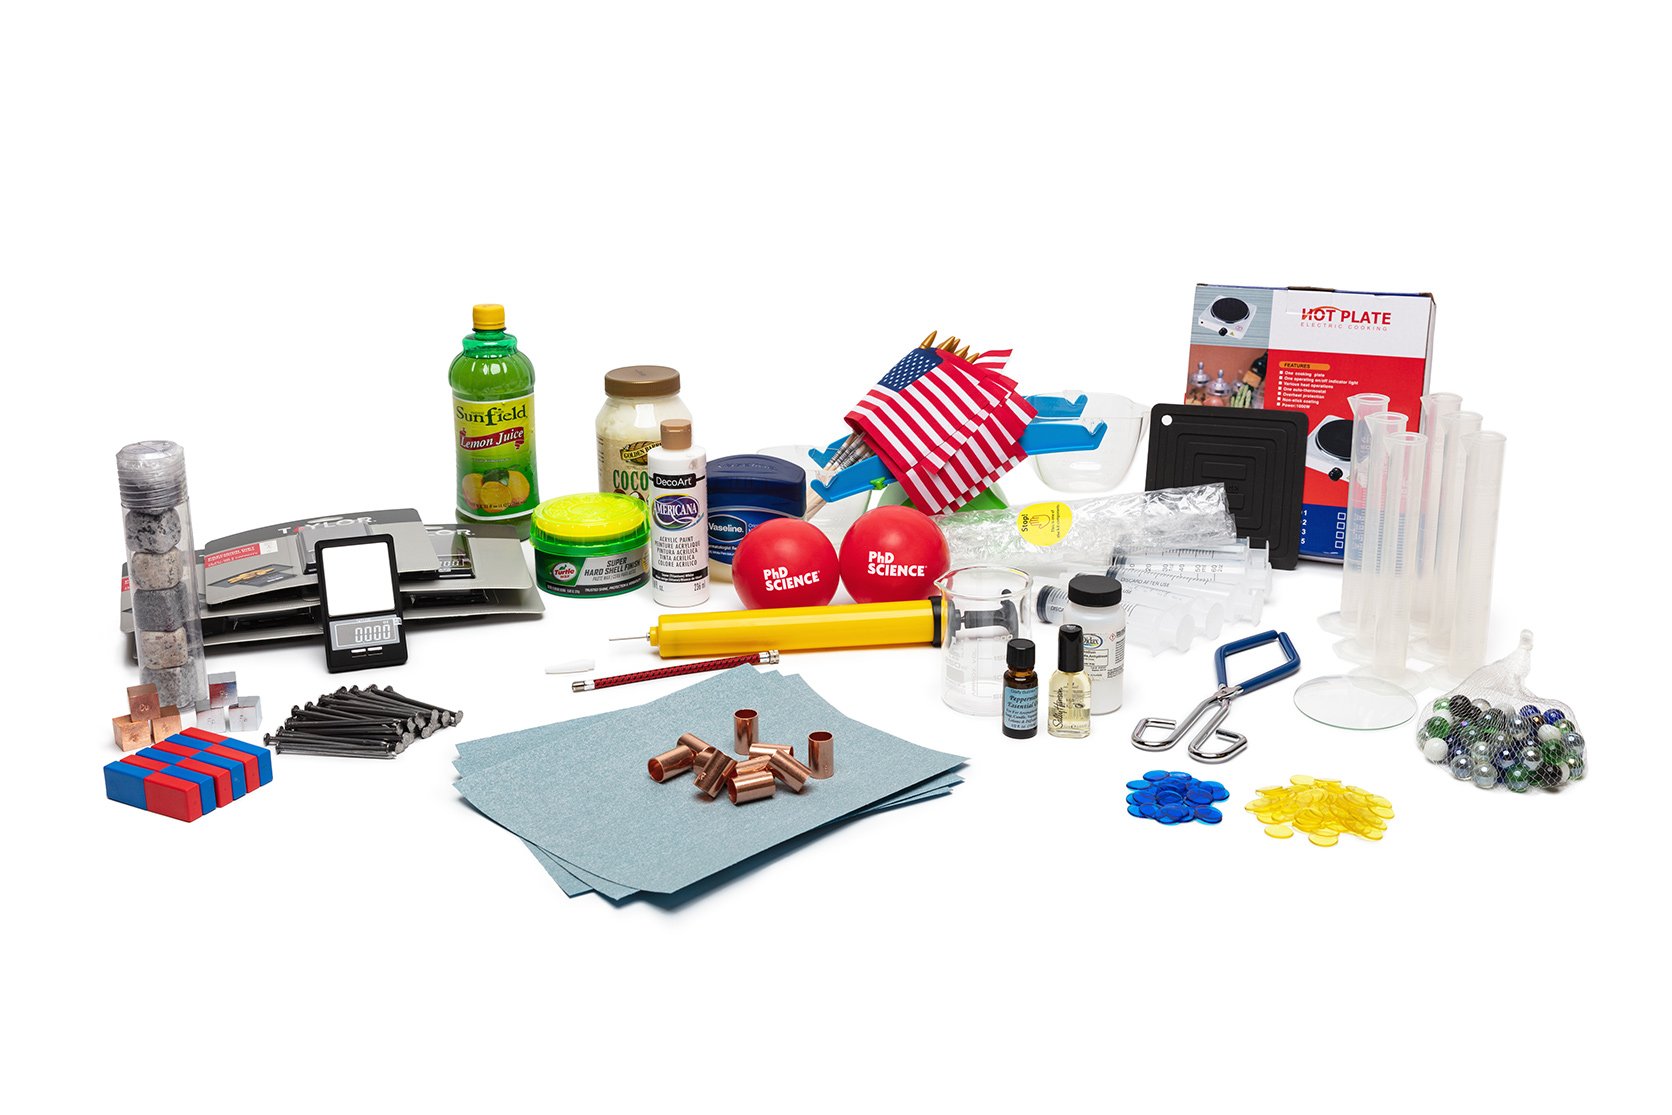 PhD Science hands-on materials kit from Level 5 Module 1 that includes sandpaper, lemon juice concentrate, graduated cylinders, and rubber balls